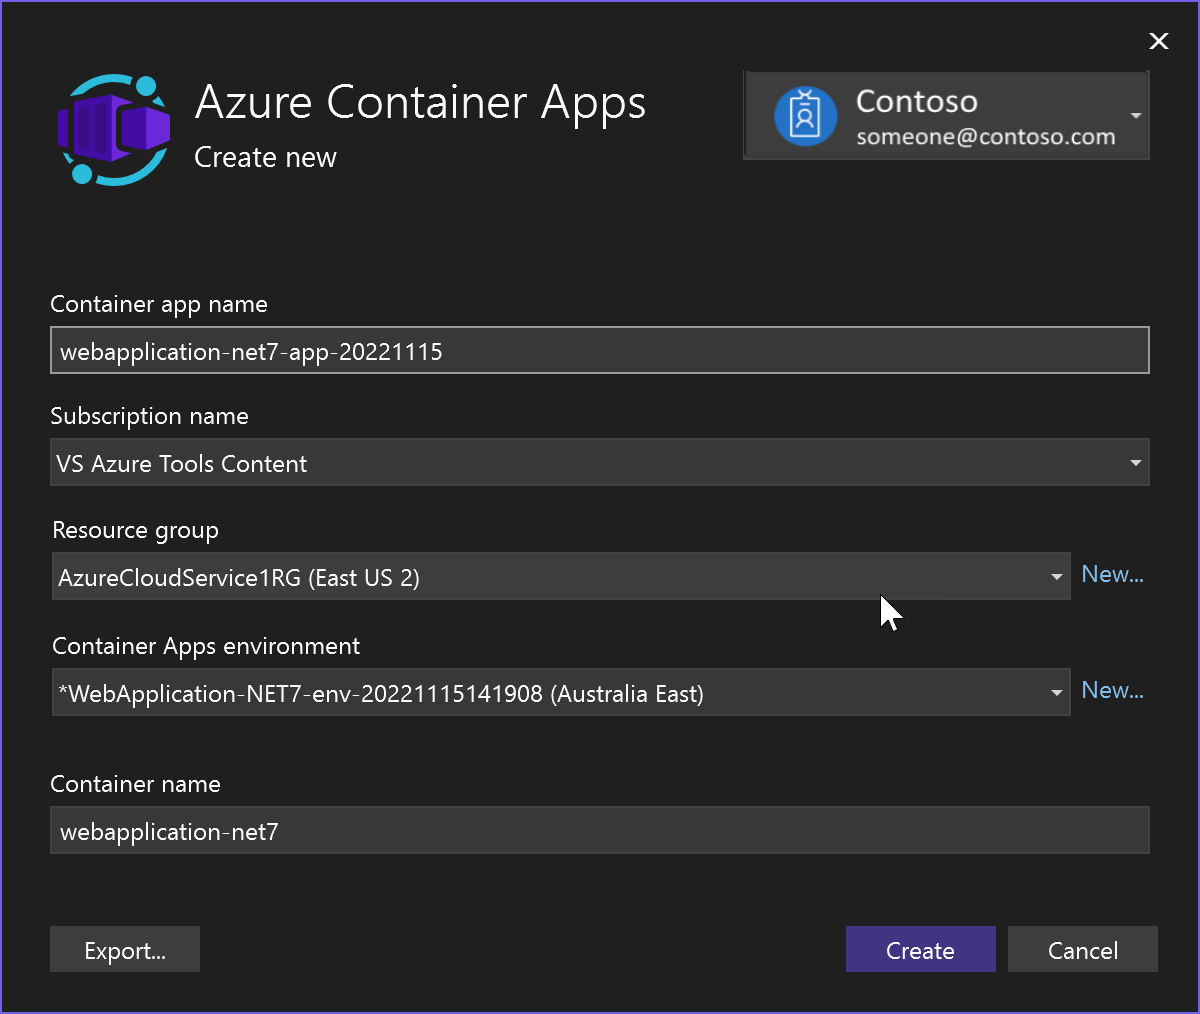 Screenshot showing creating a new Azure Container App.